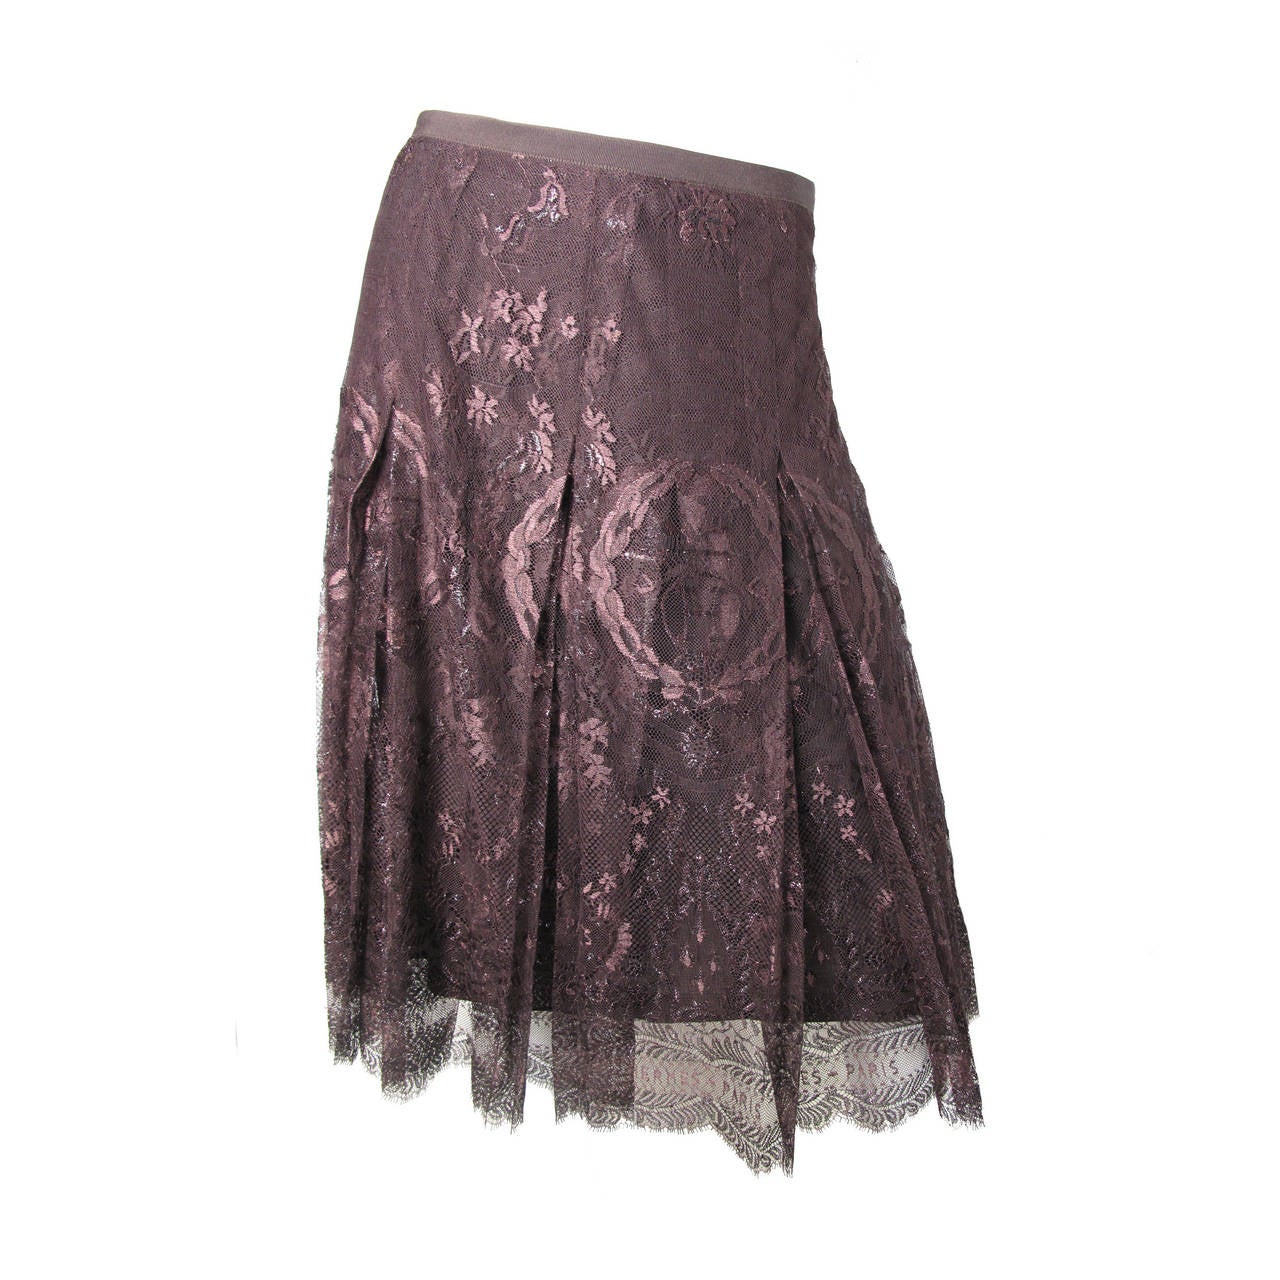 Hermes Lace Skirt with Hermes Logo by Gaultier - Runway 